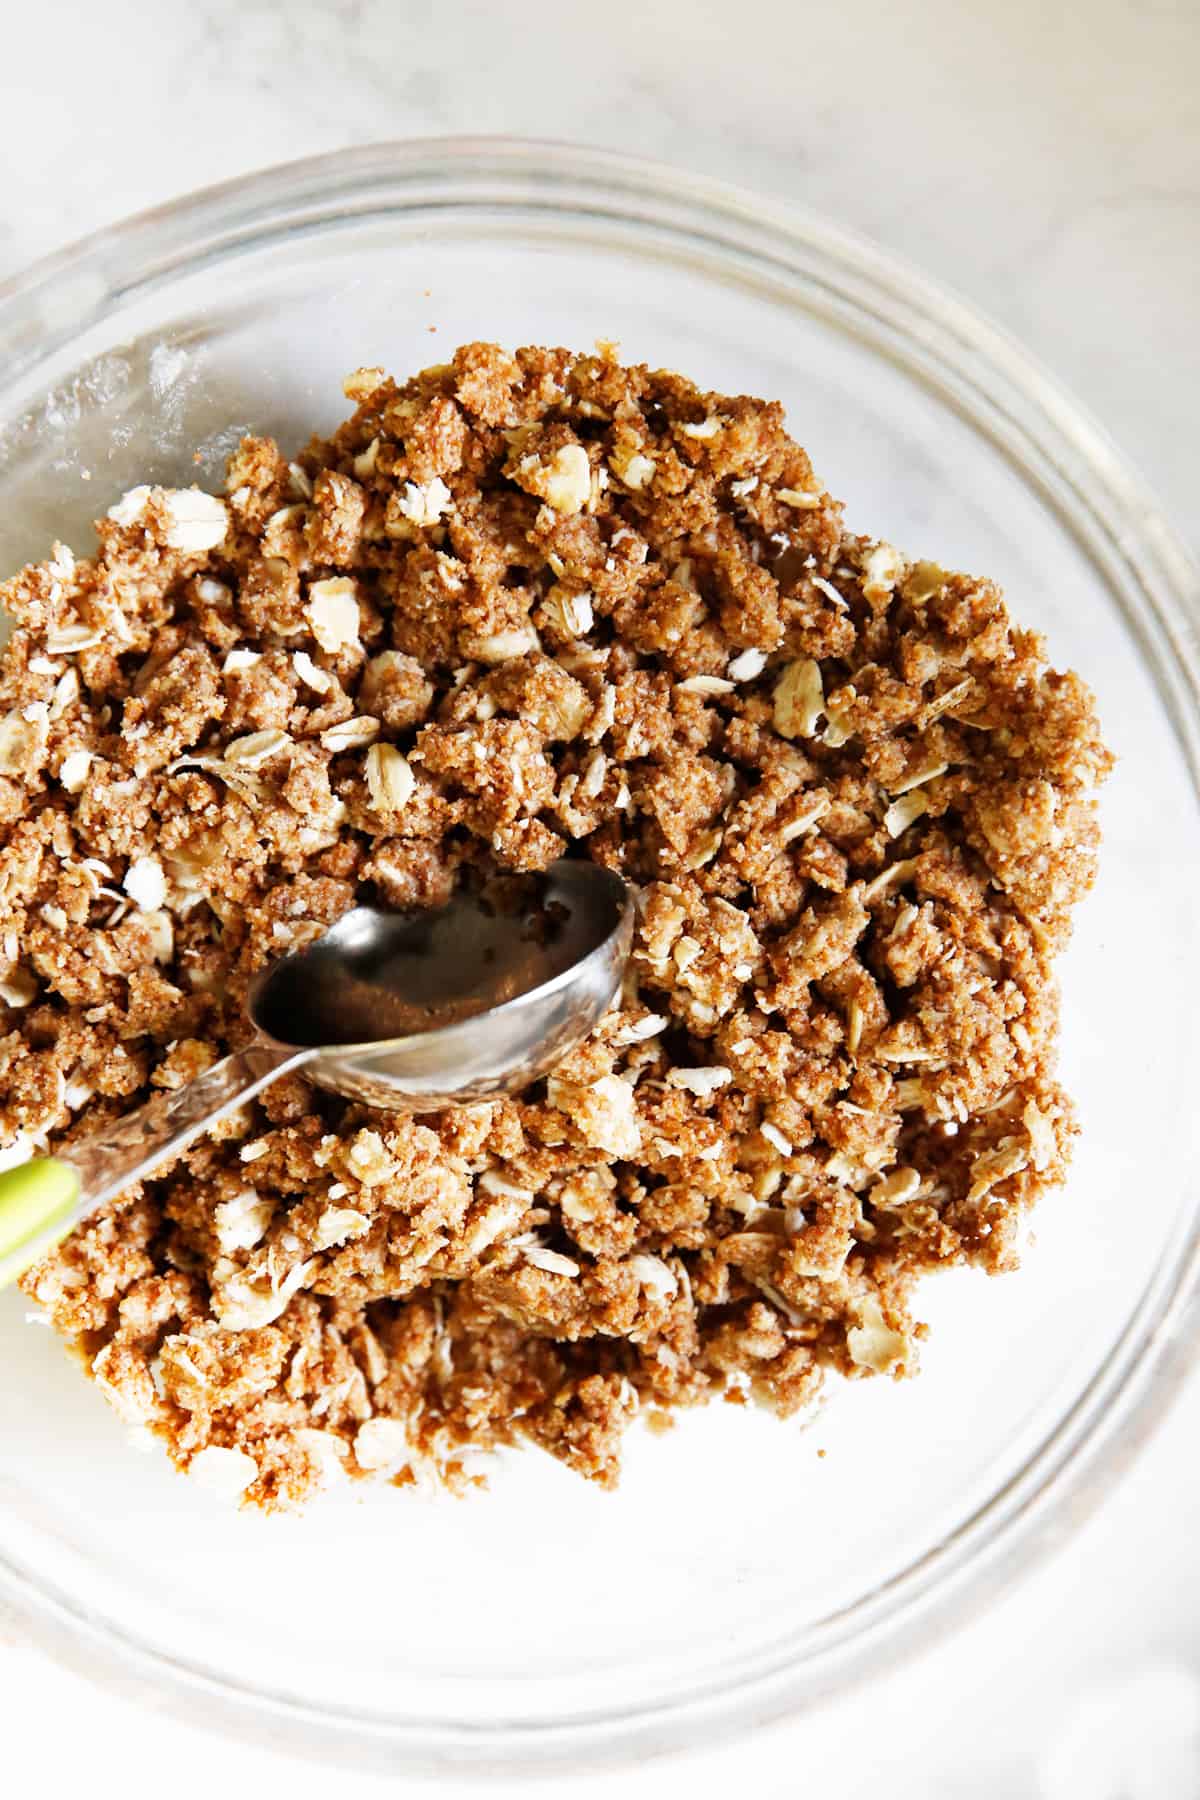 Oat crumble topping in a bowl